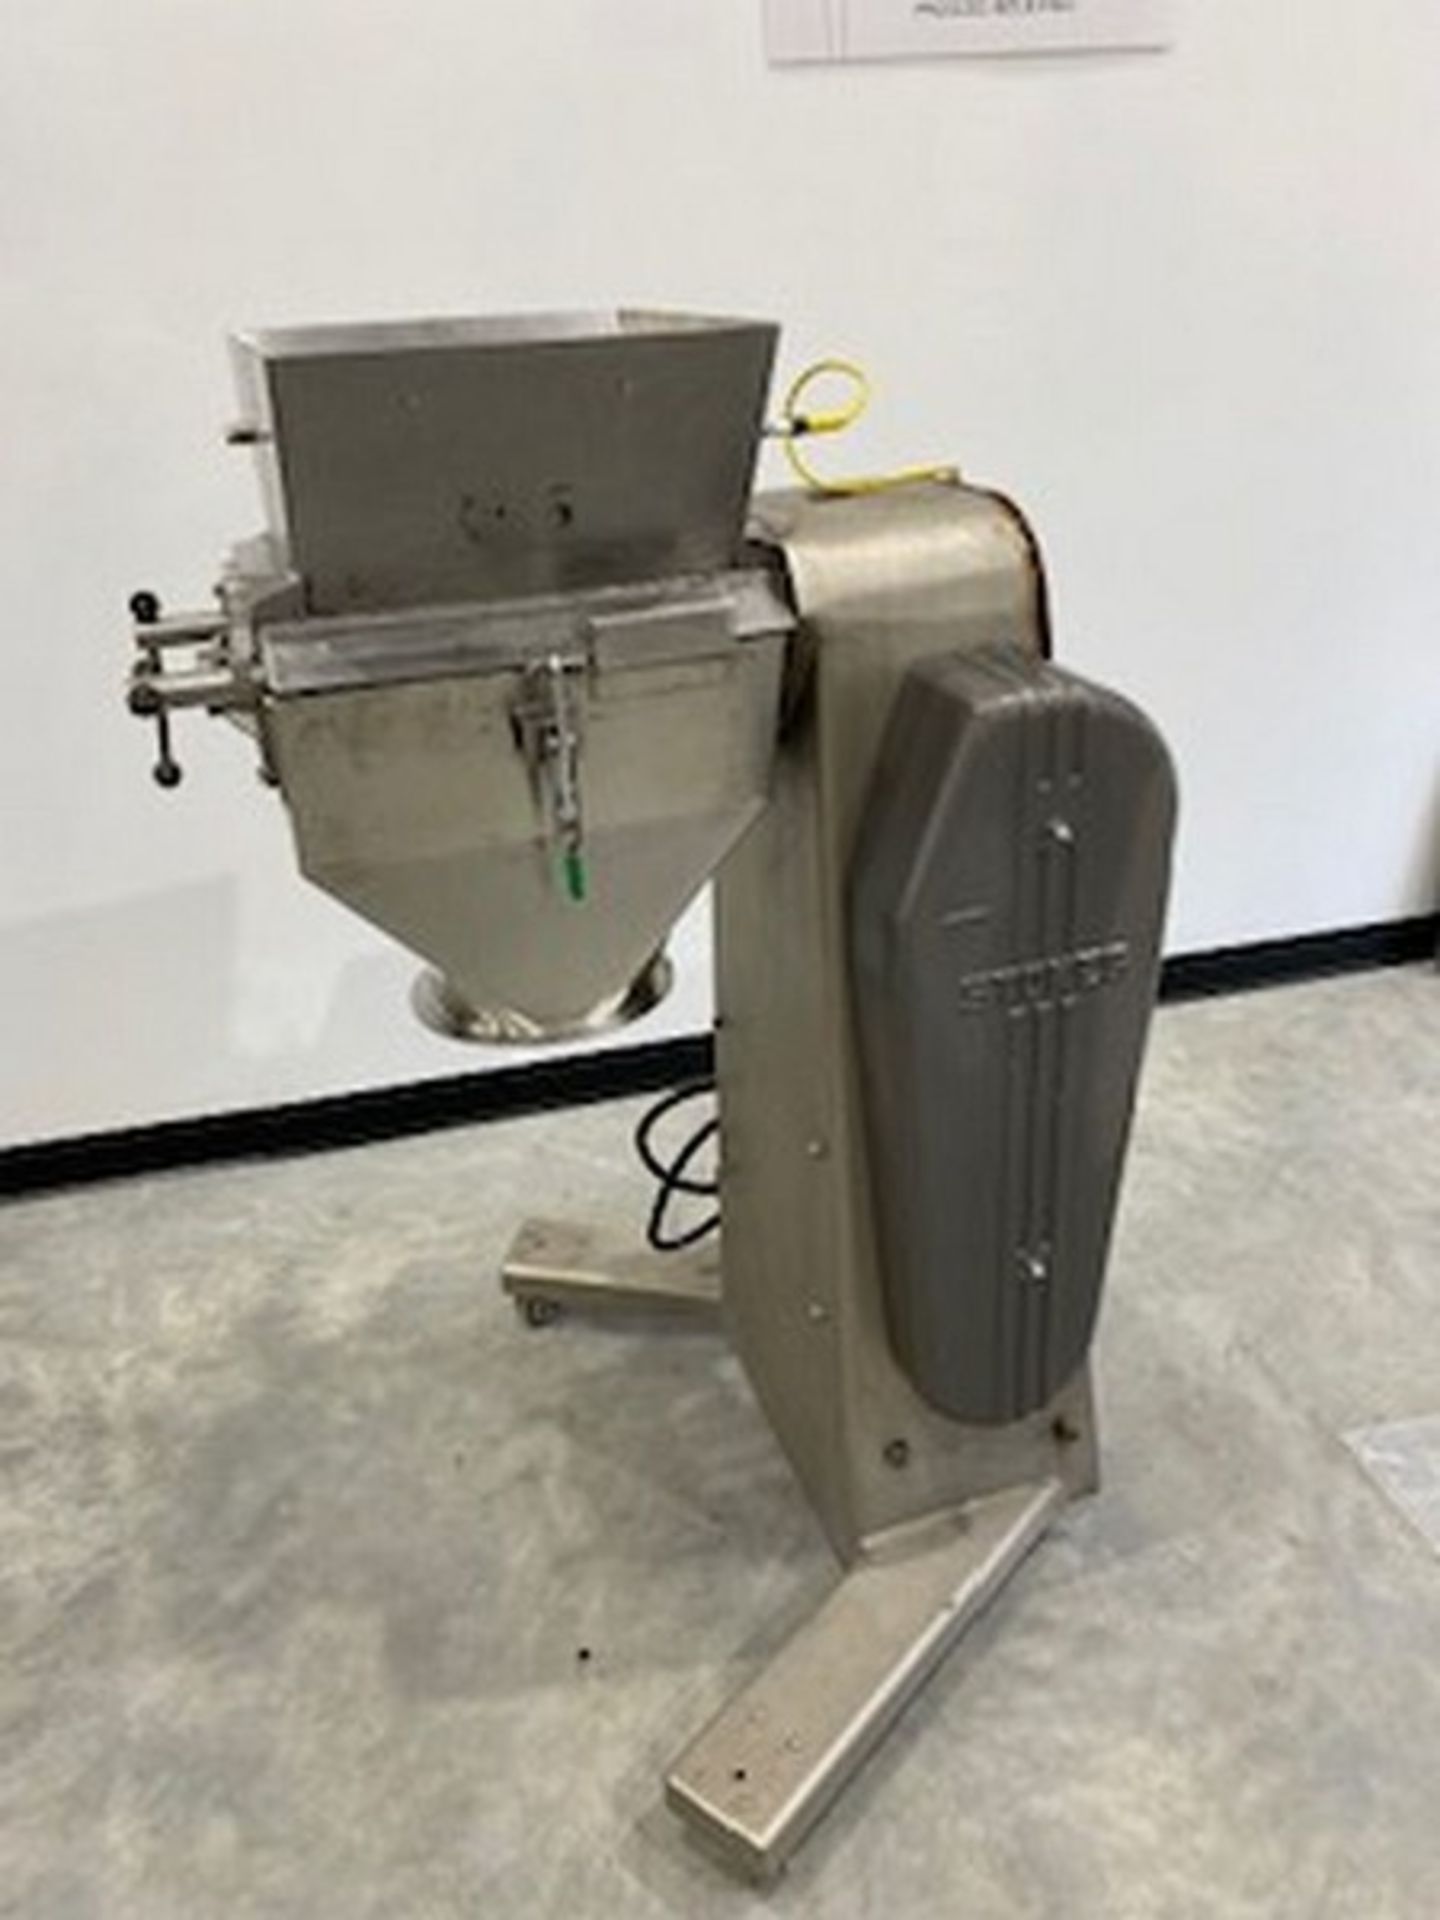 Stokes Oscillator - Model: 43-4. Comes with Discharge Chute, screen and locking arms. Driven by a